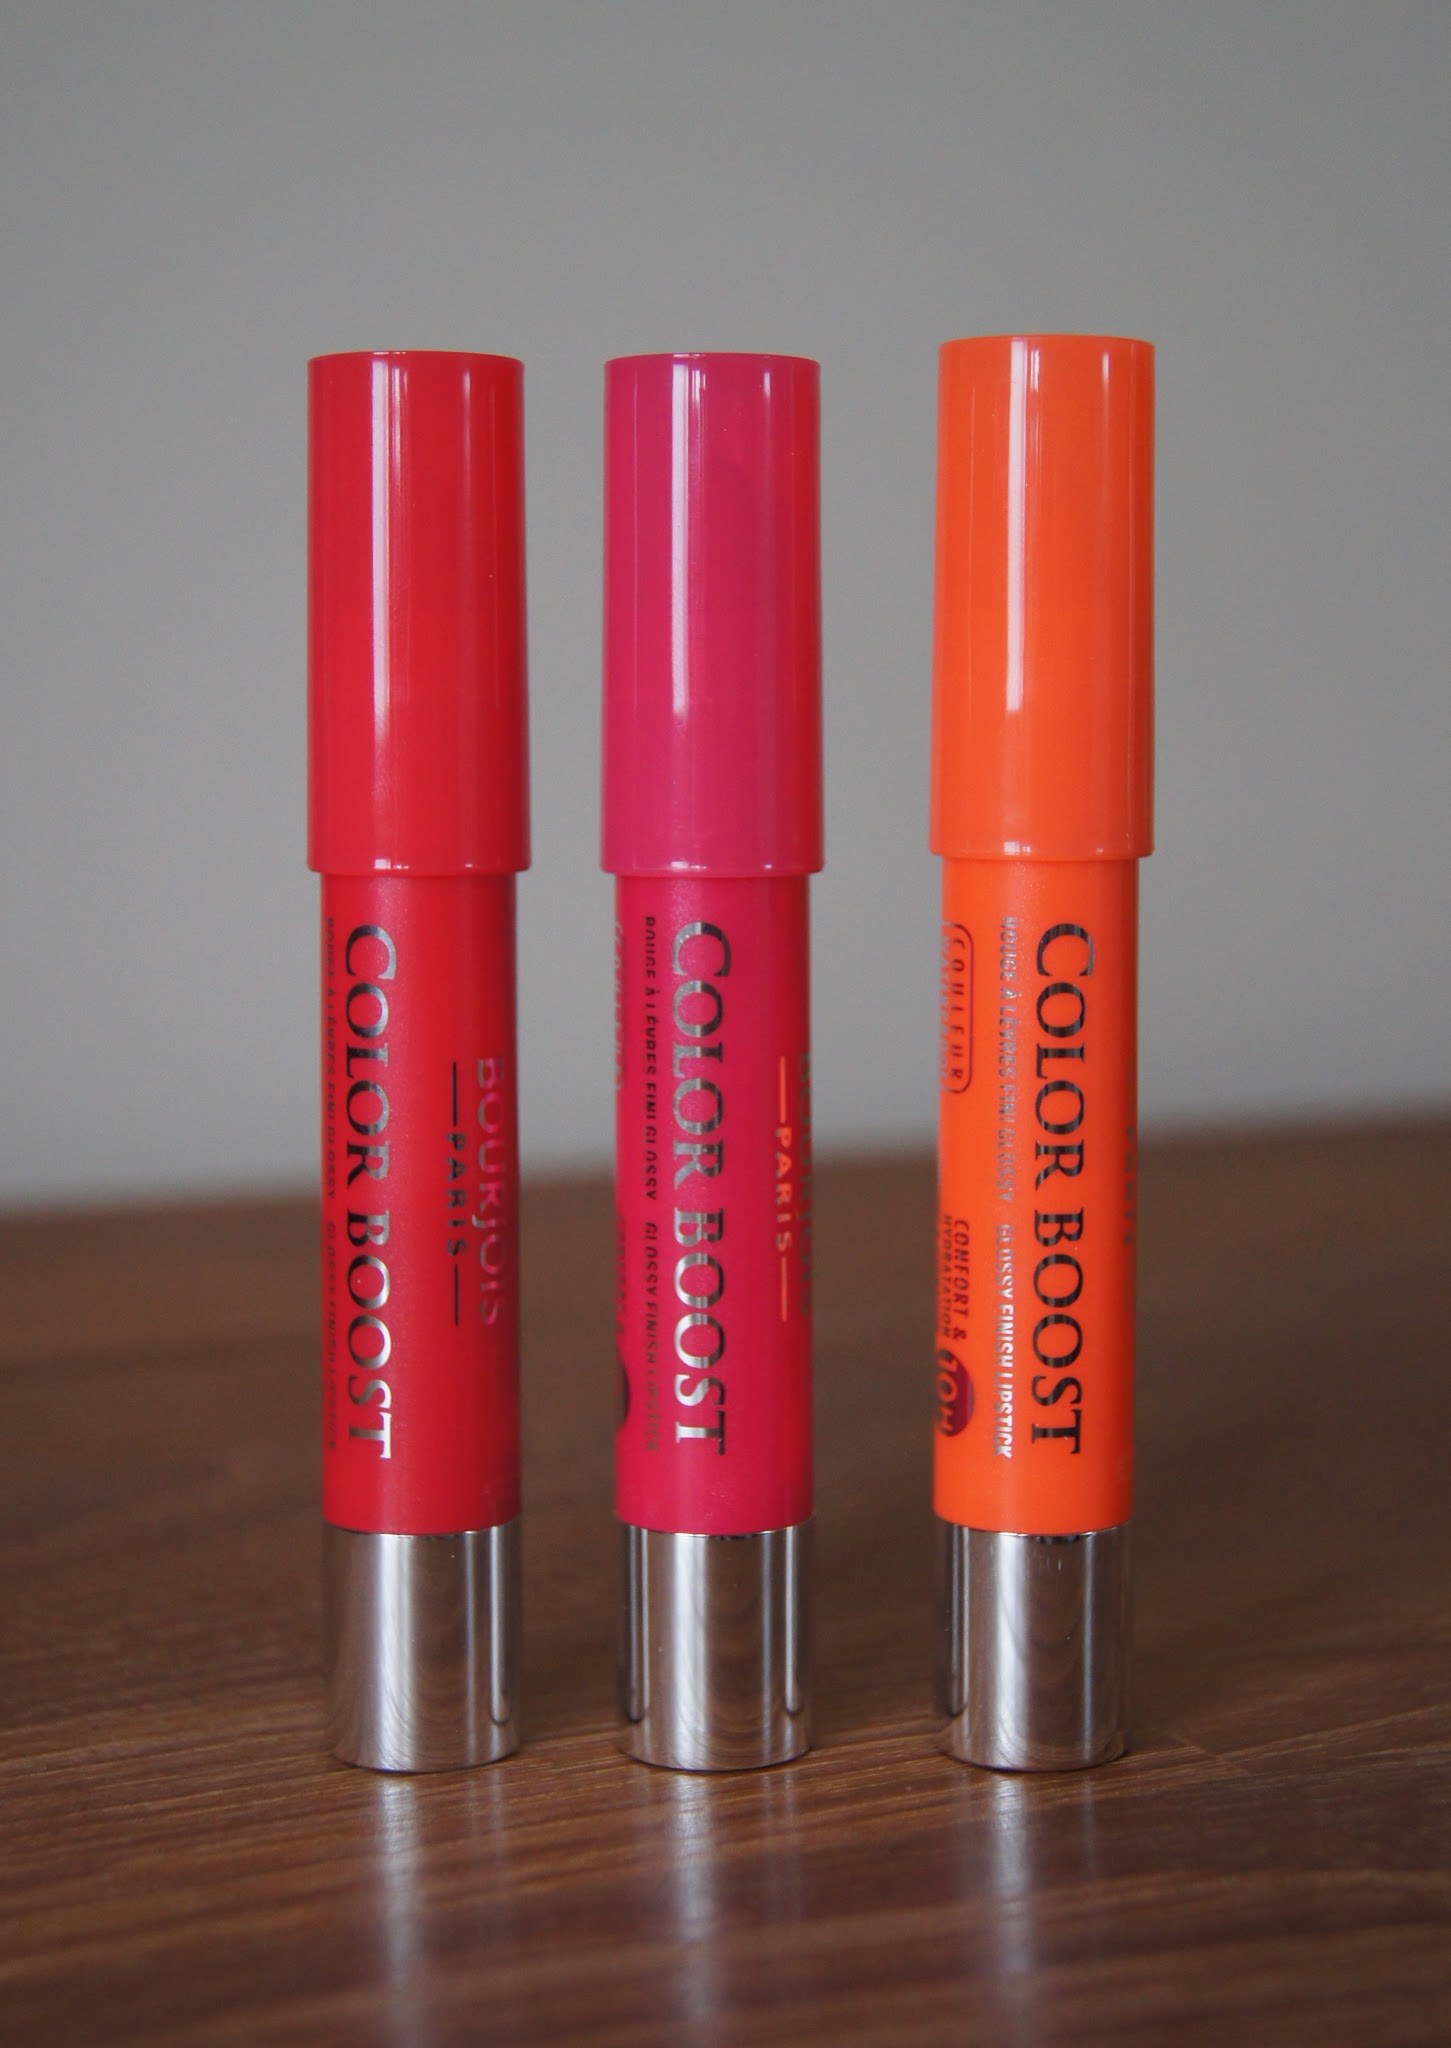 Bourjois Colour Boost Glossy Finish Lipstick Review Swatches